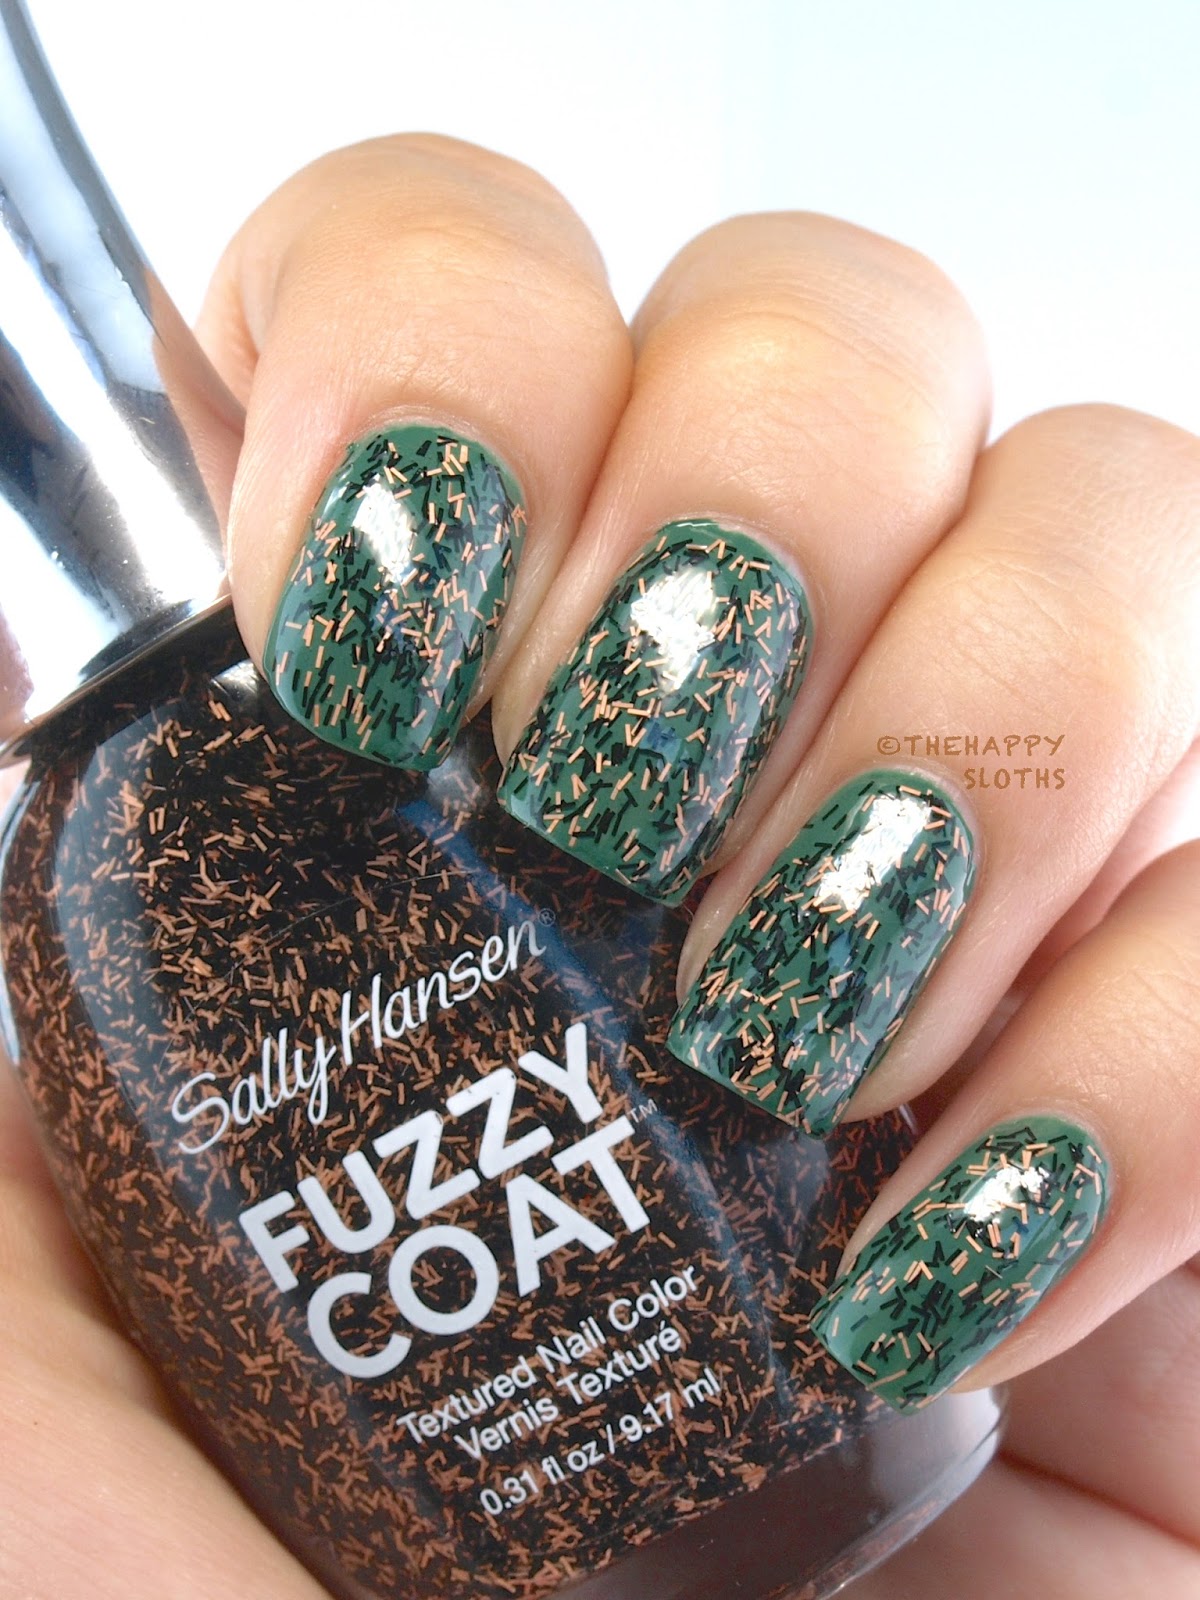 Sally Hansen Limited Edition Special Effects Fuzzy Coat Halloween Collection: Review and Swatches